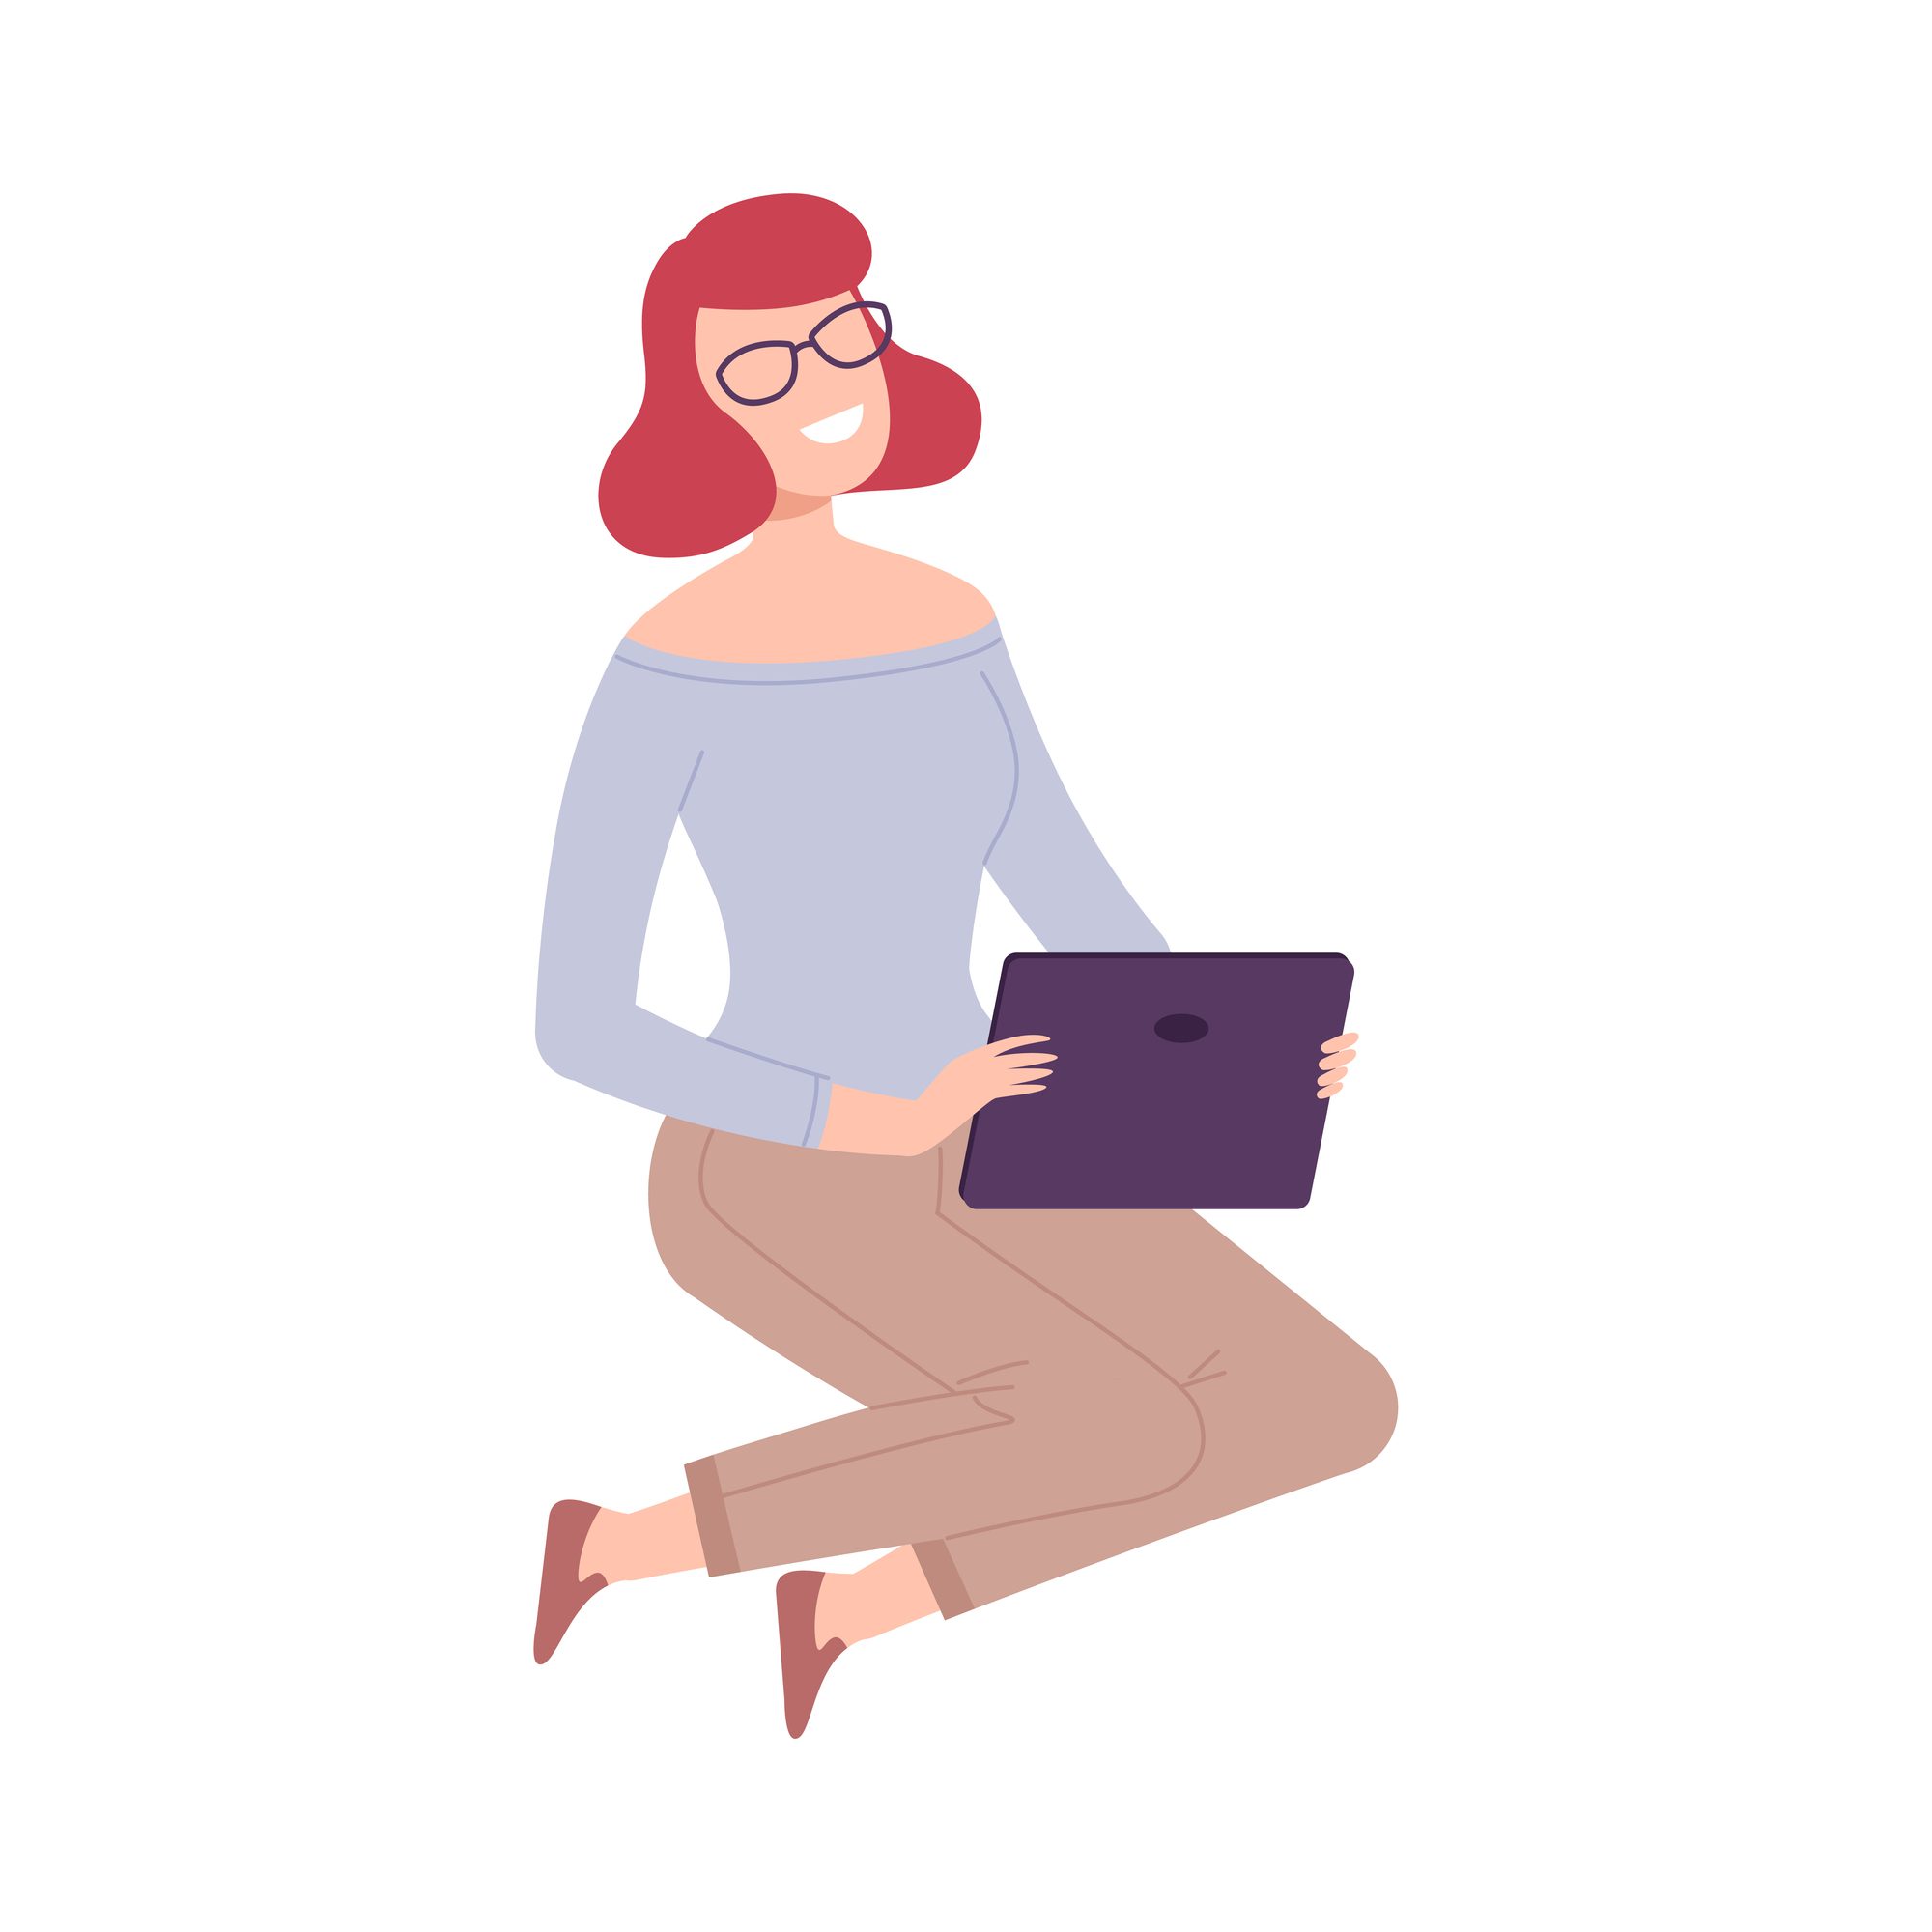 vector image of a happy woman sitting down with a tablet/ipad